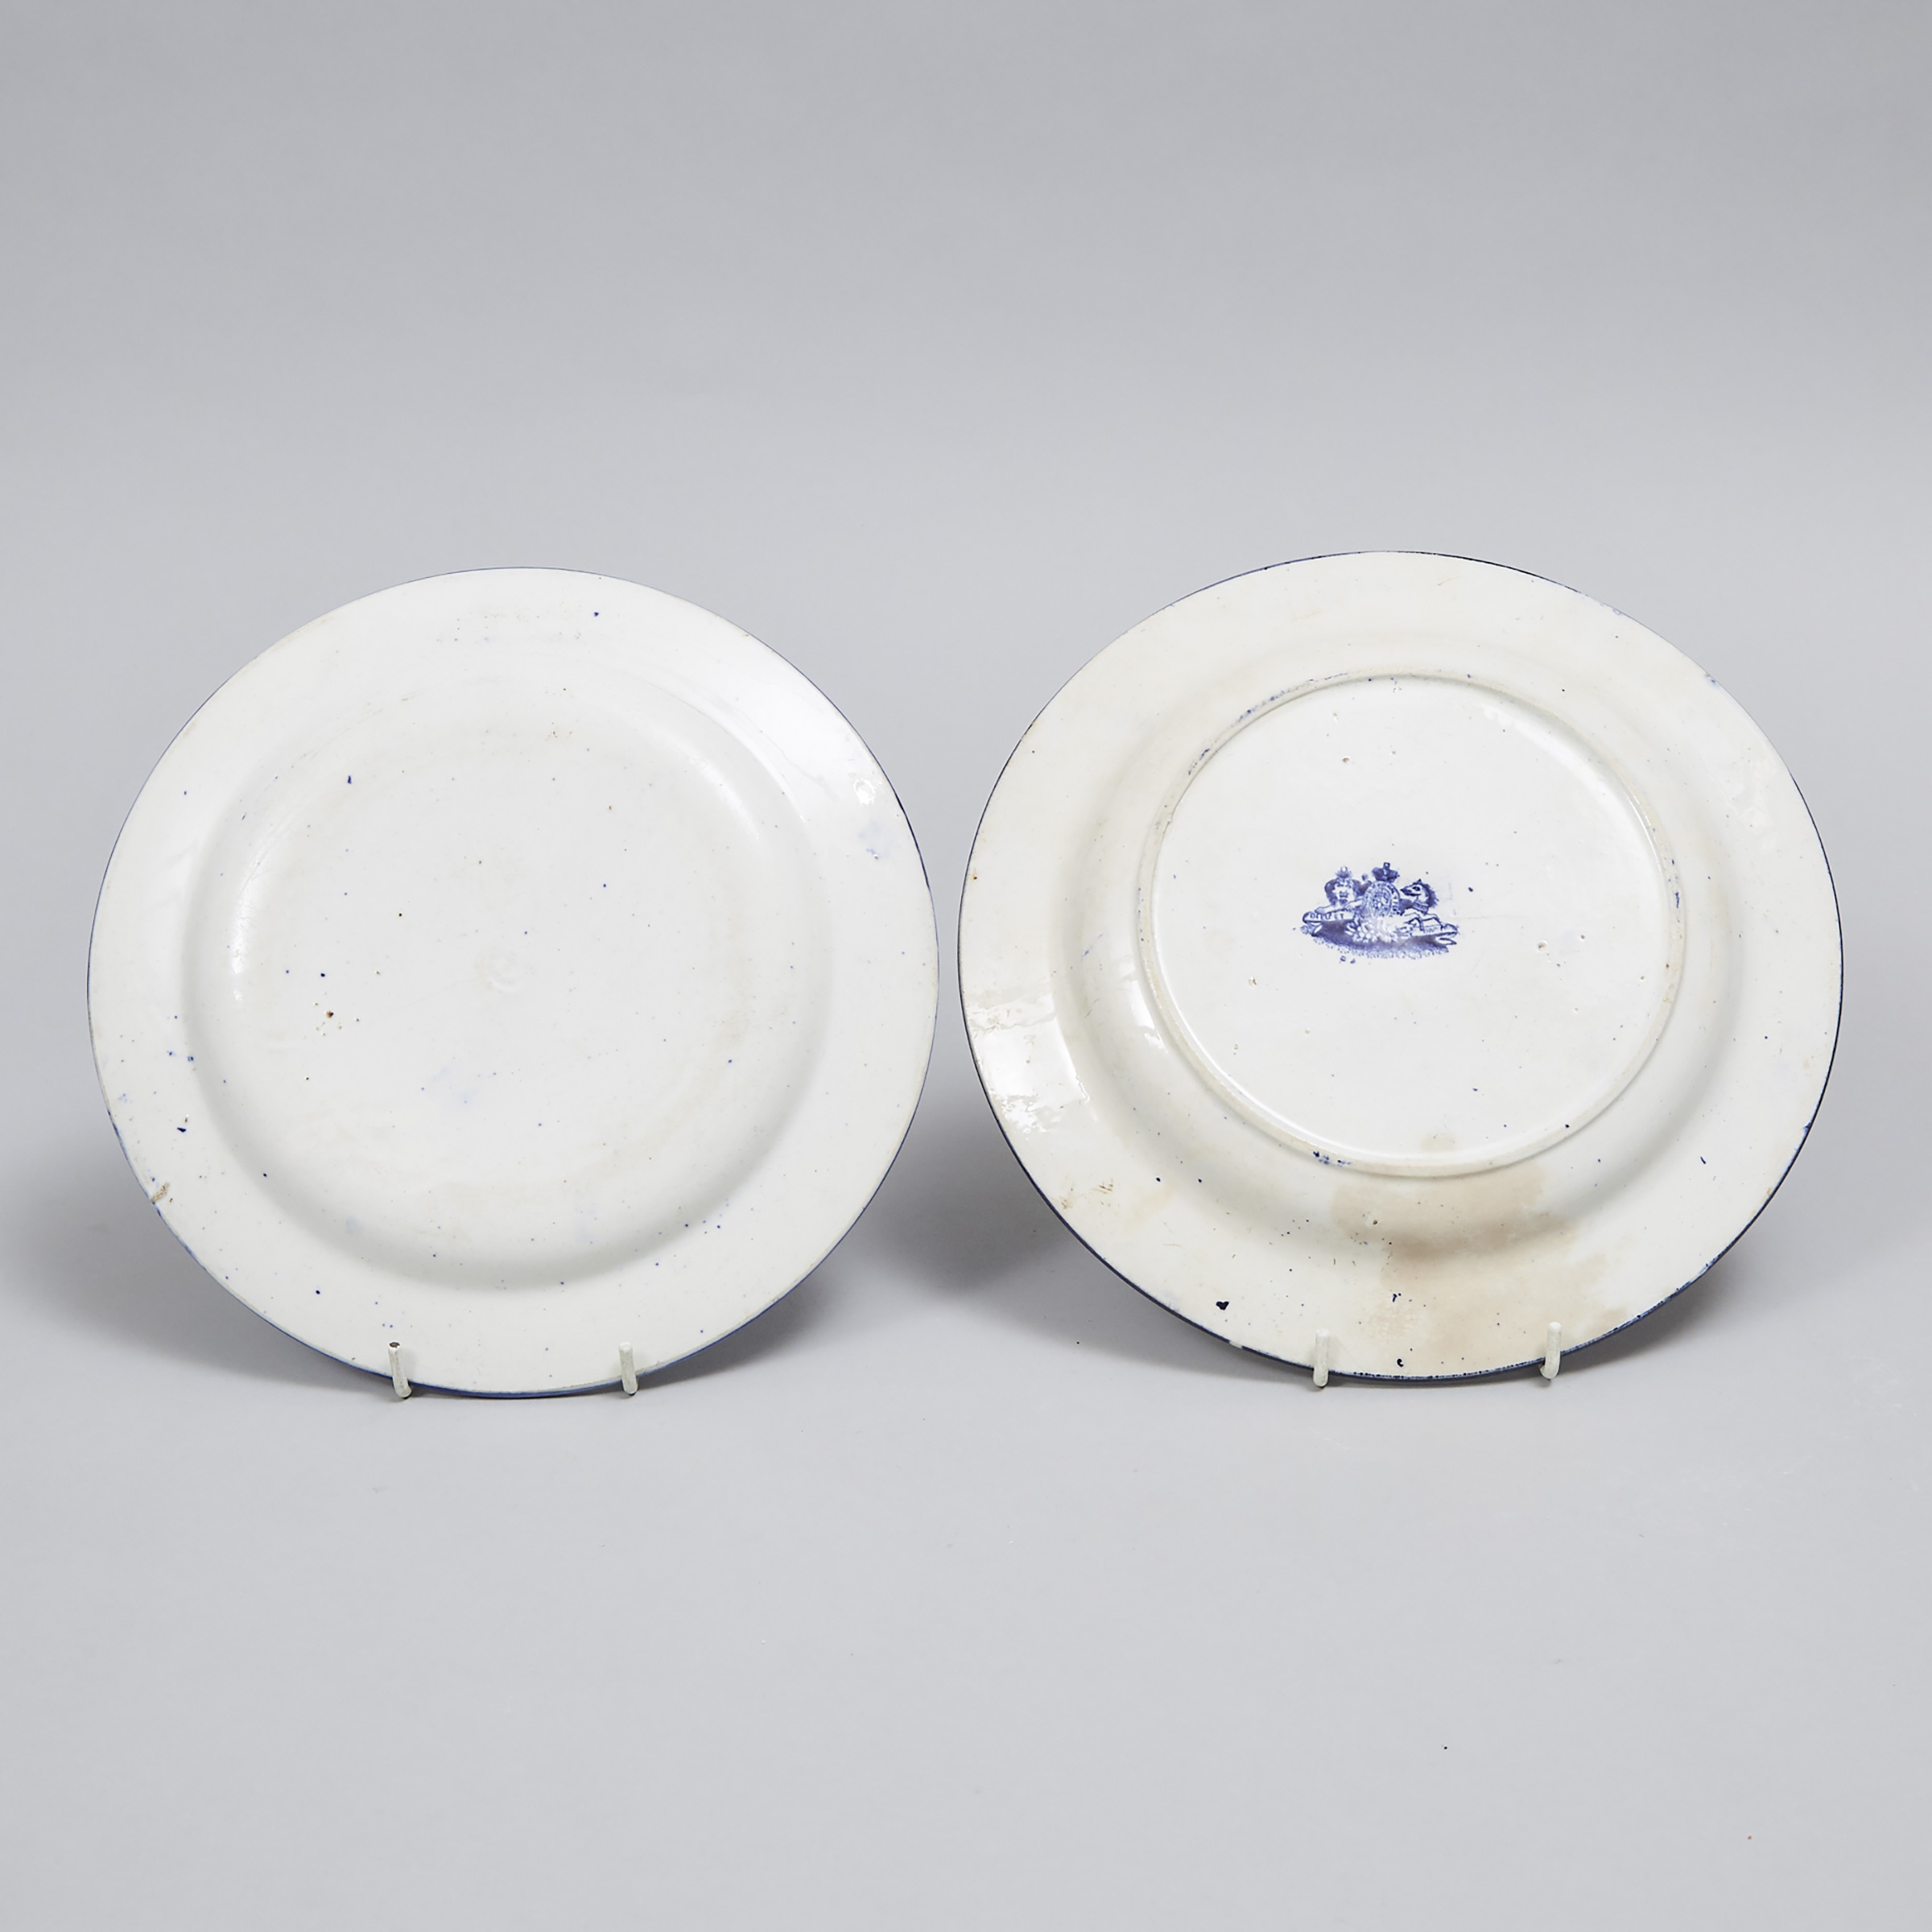 Two Staffordshire Pottery Blue and White Transferware 'Alahambra' Pattern Plates for the Persian Market, British Anchor Pottery, c.1864